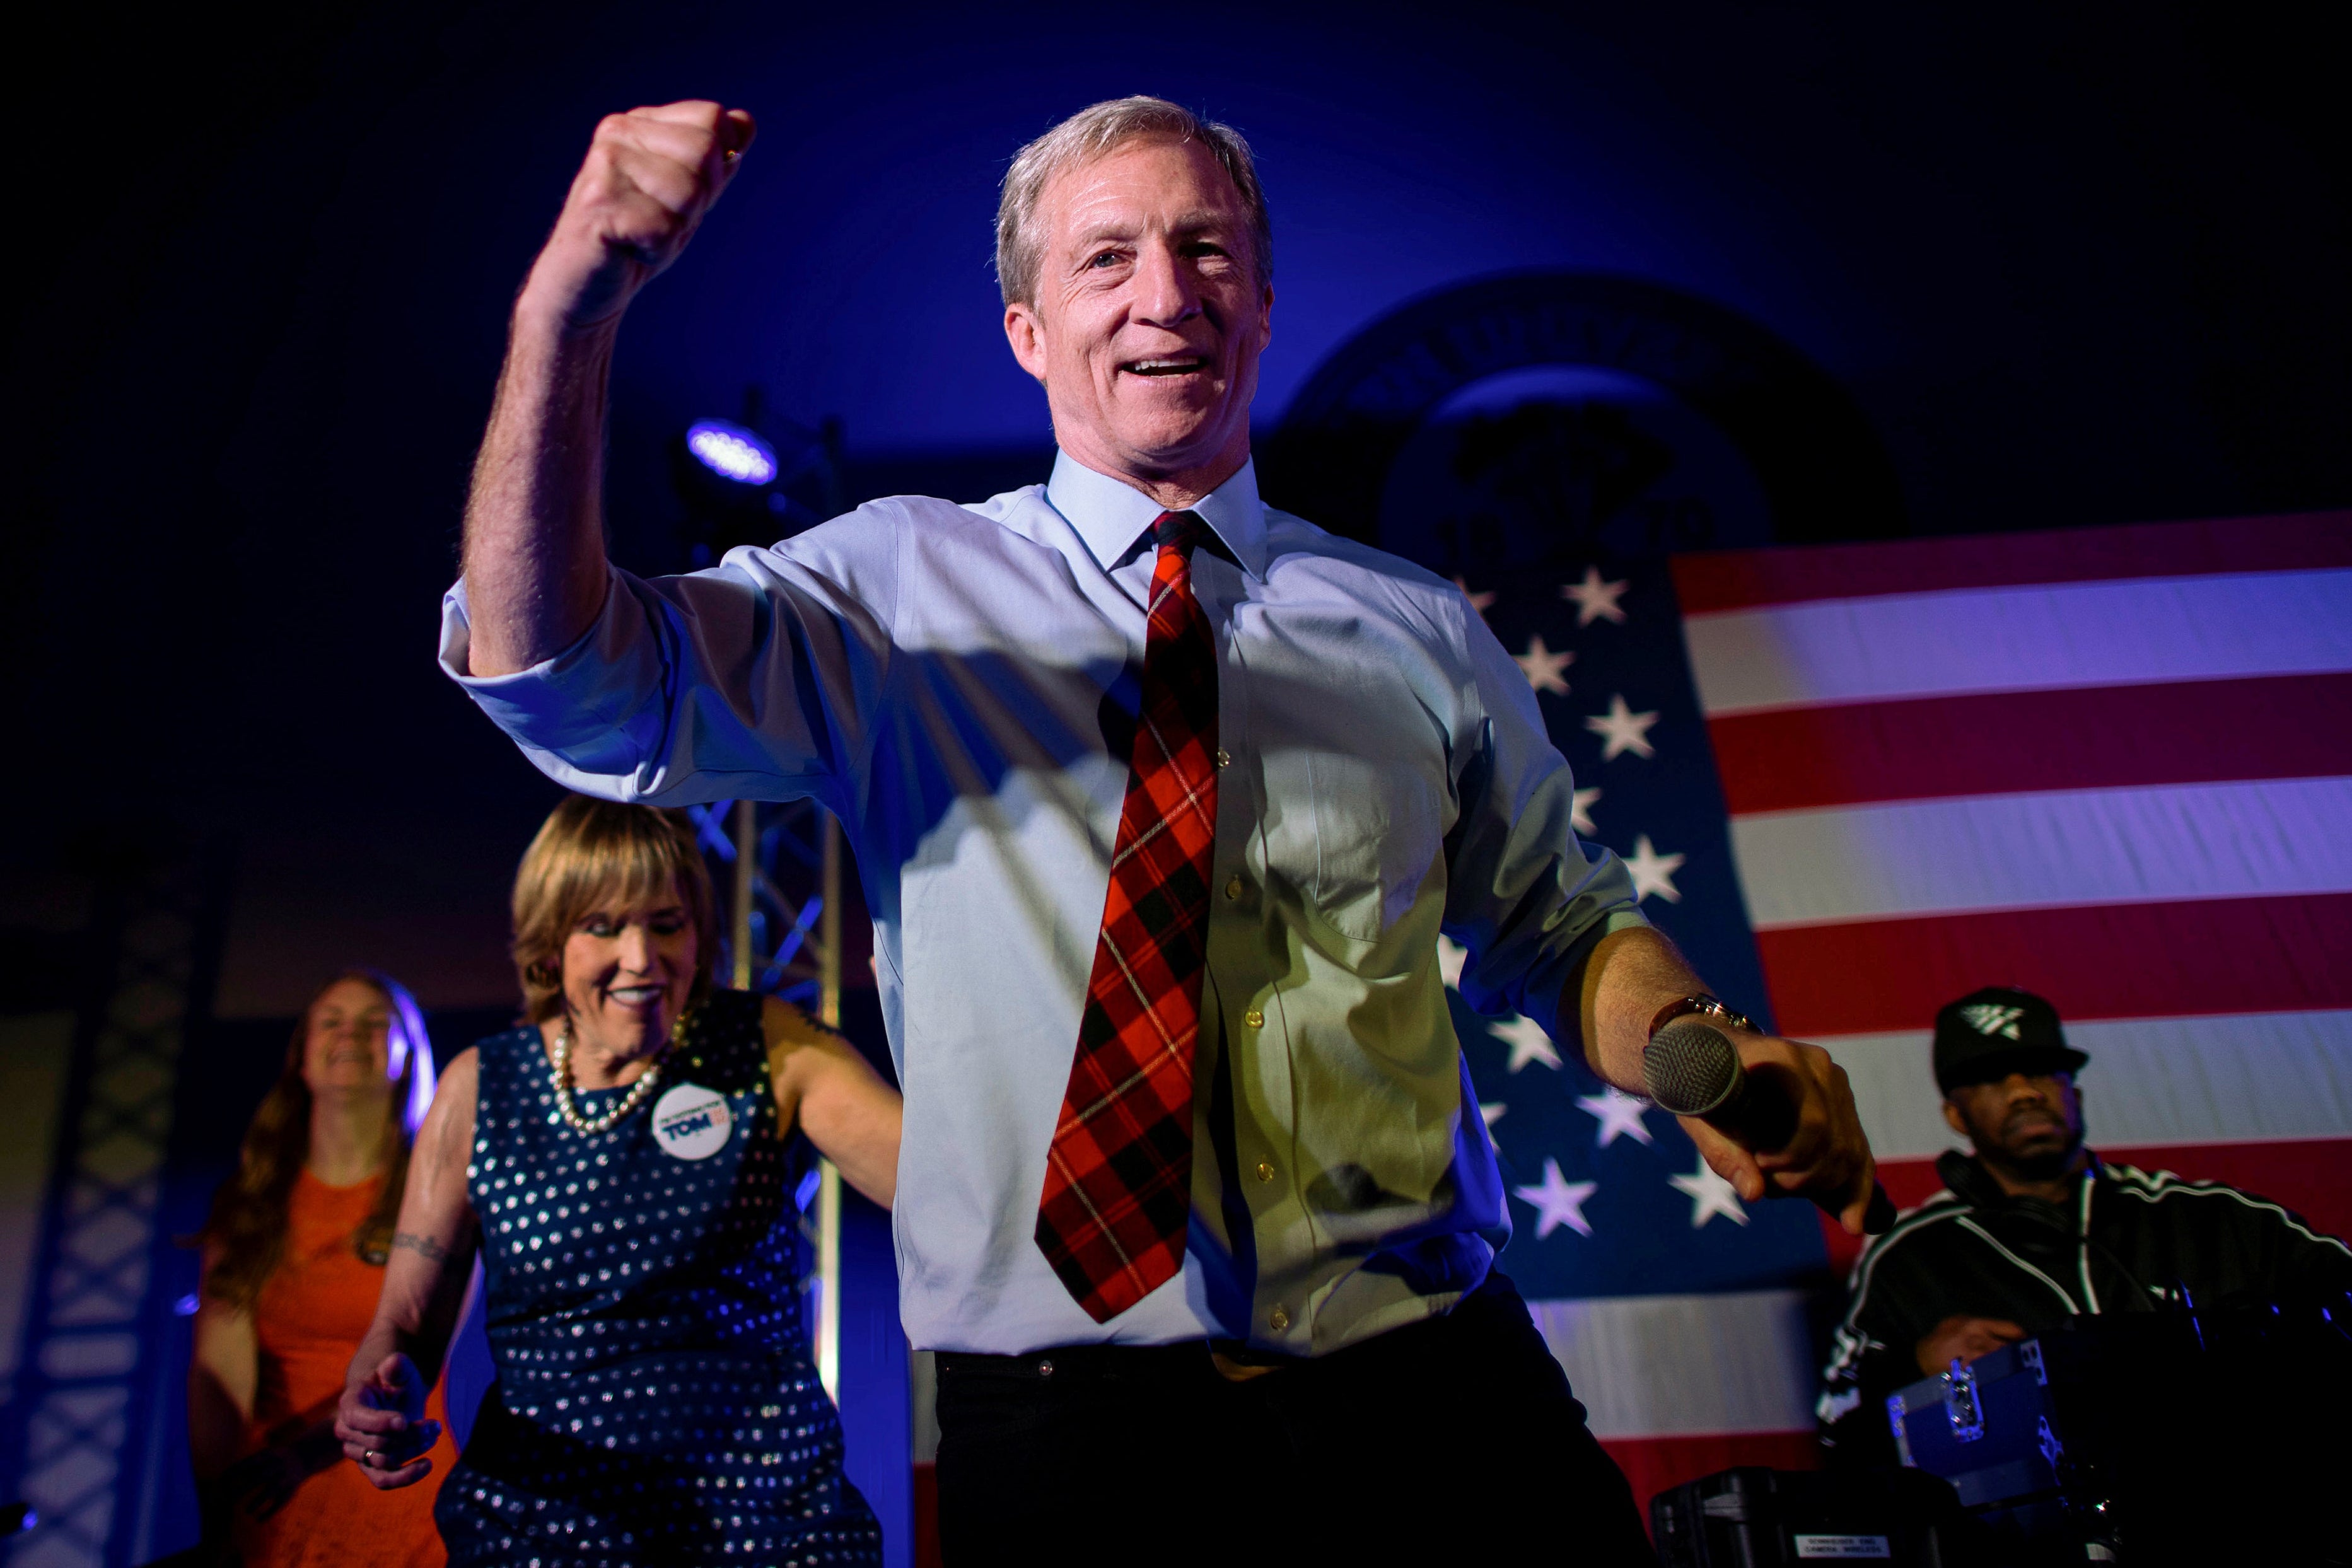 Tom Steyer dances onstage with rapper Juvenile on stage in front of an American flag. 